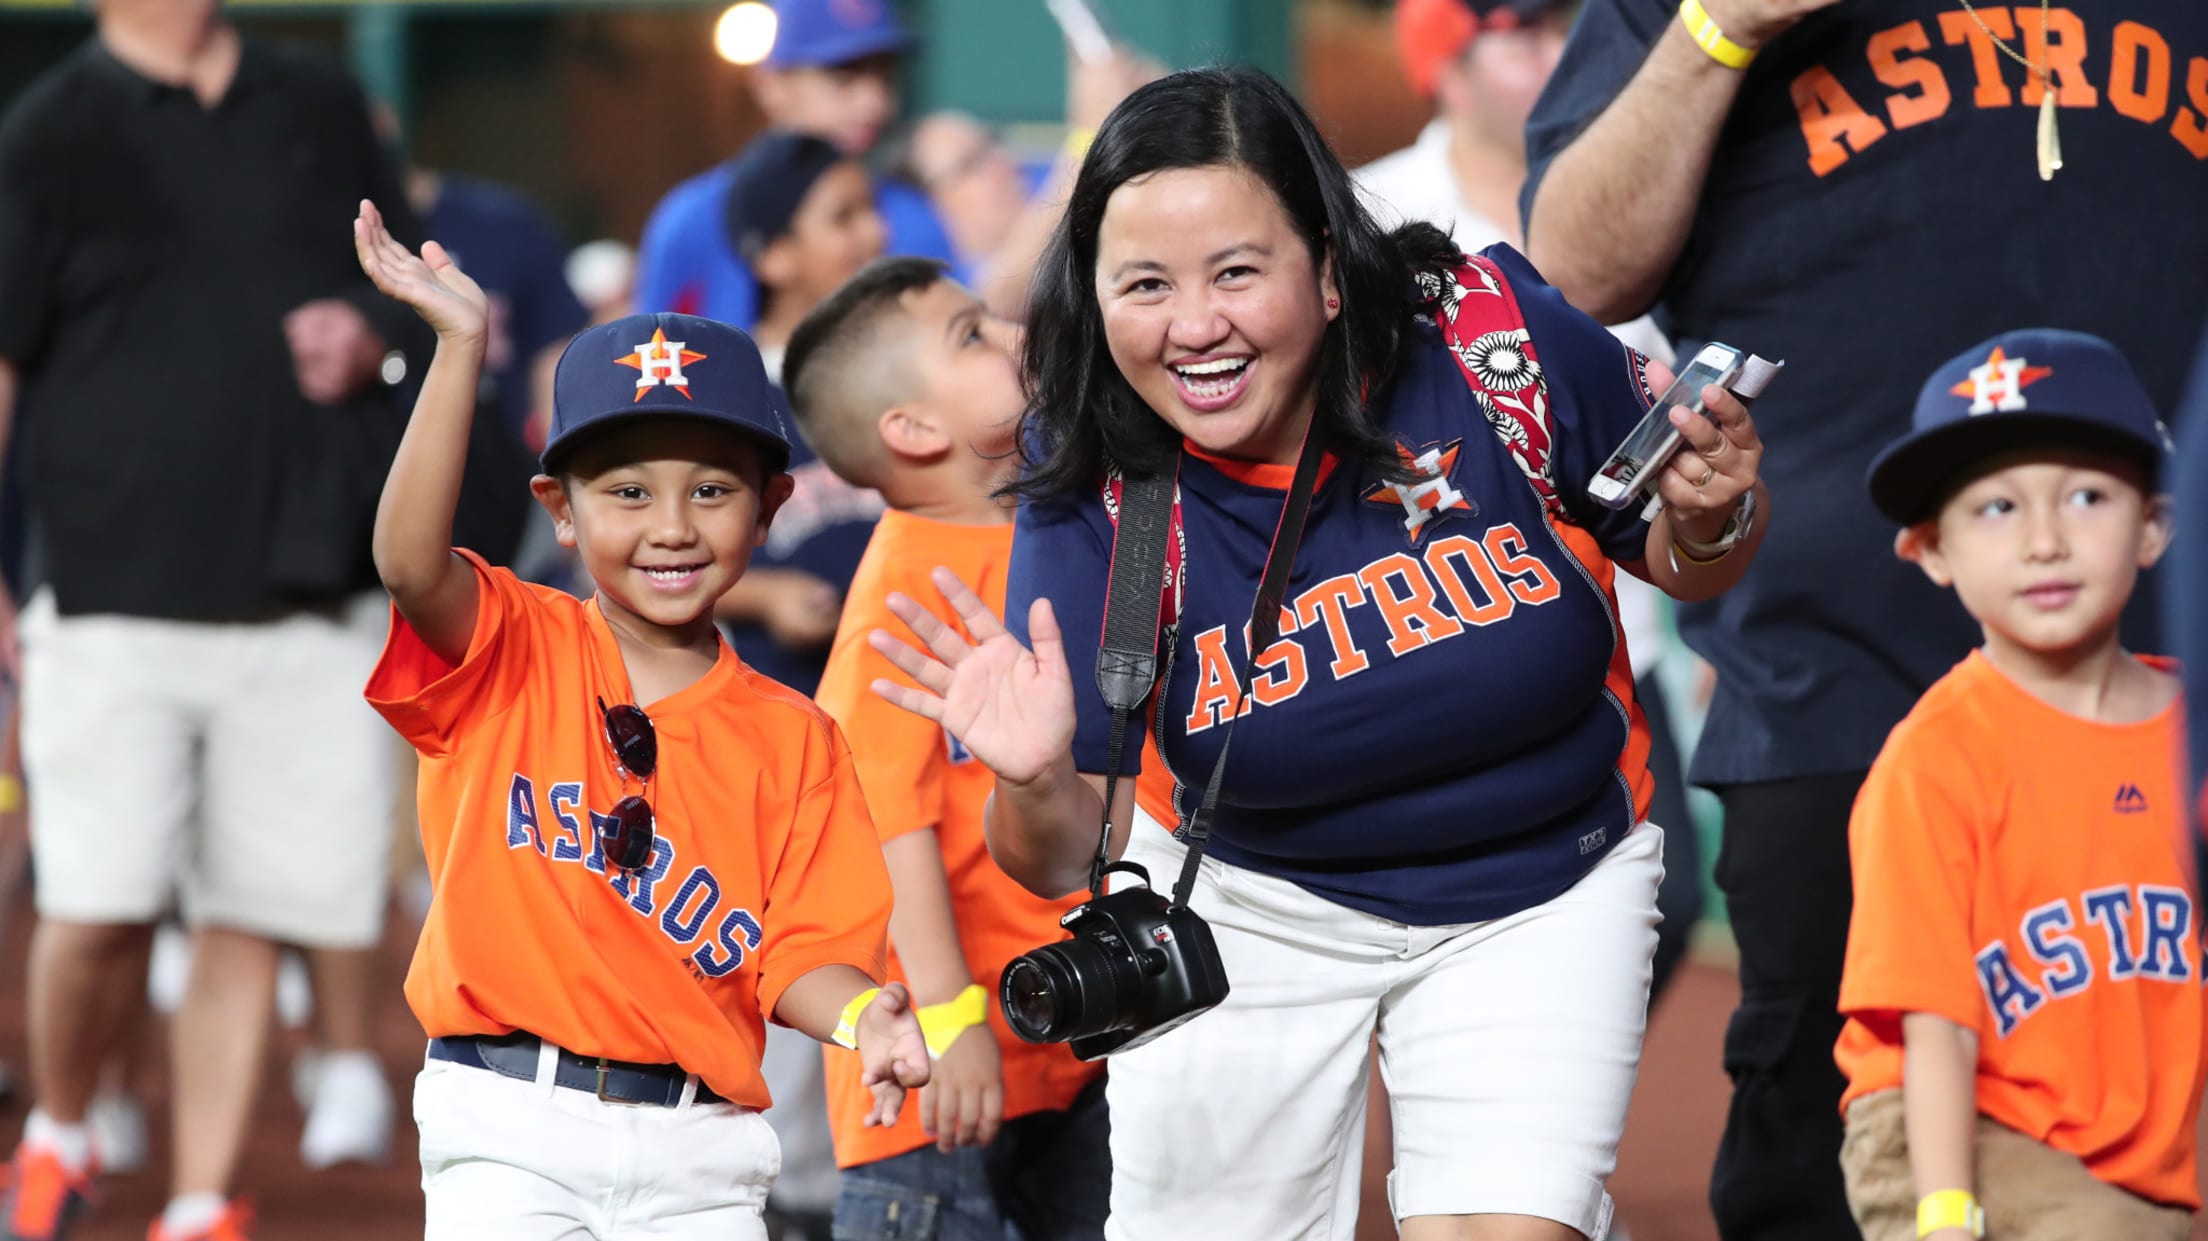 Exciting, FREE Opportunity: Houston Astros MLB Youth Academy